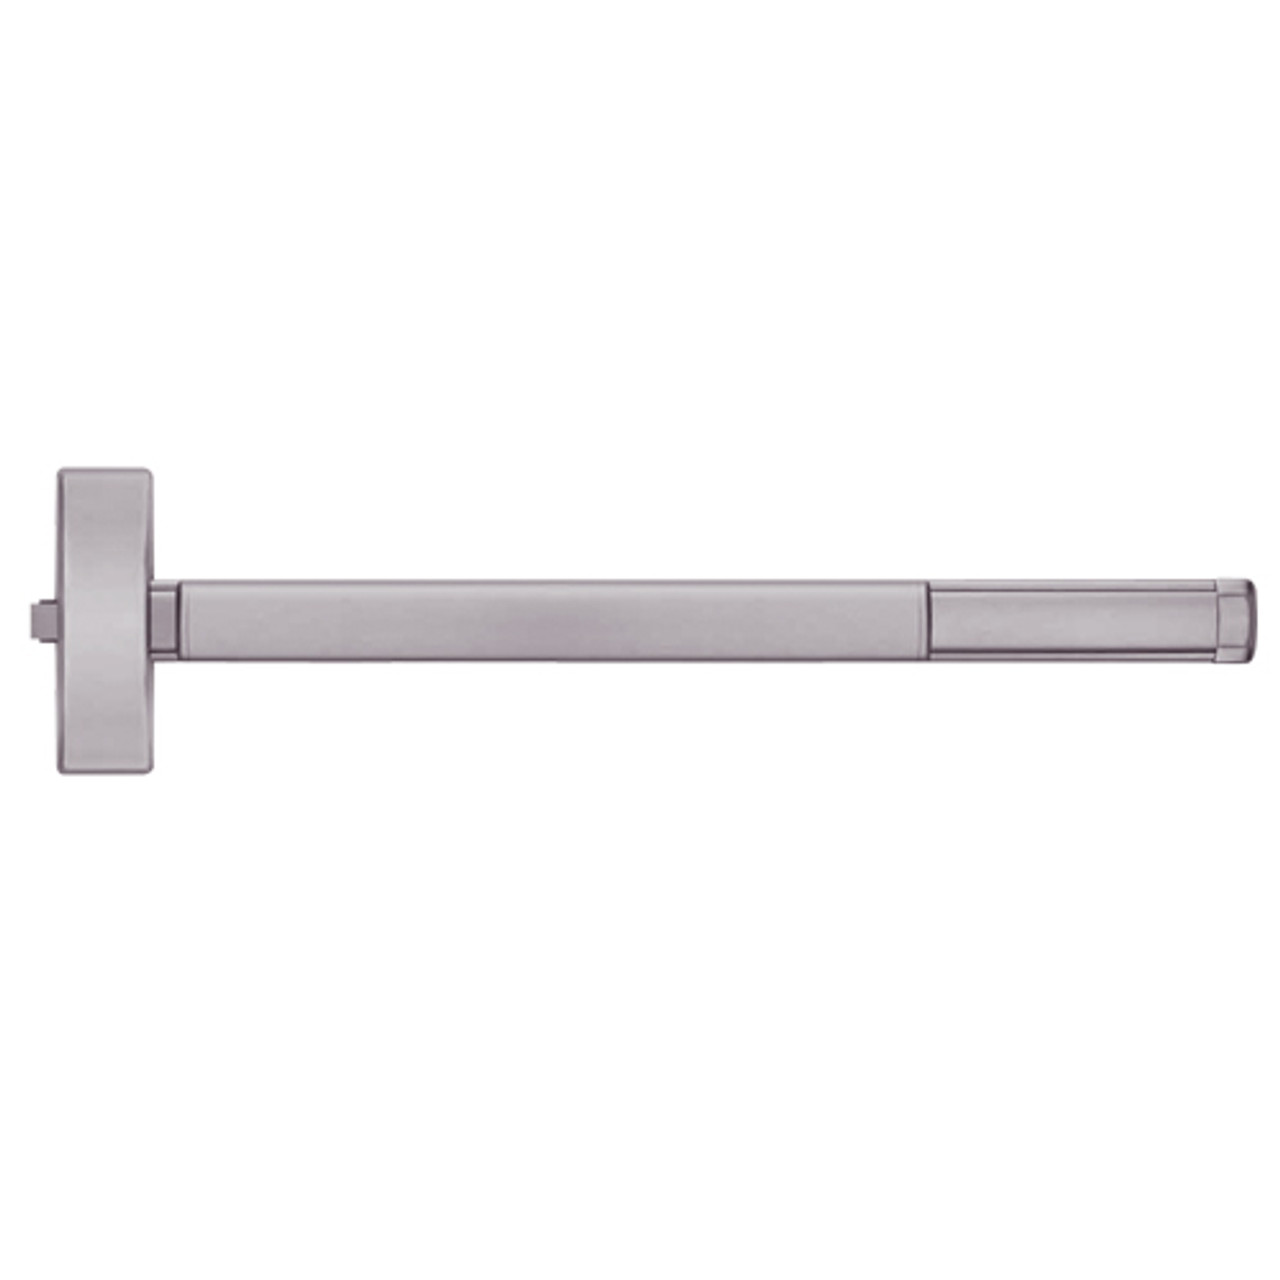 ELRFL2115-630-36 PHI 2100 Series Fire Rated Apex Rim Exit Device with Electric Latch Retraction Prepped for Thumb Piece Always Active in Satin Stainless Steel Finish